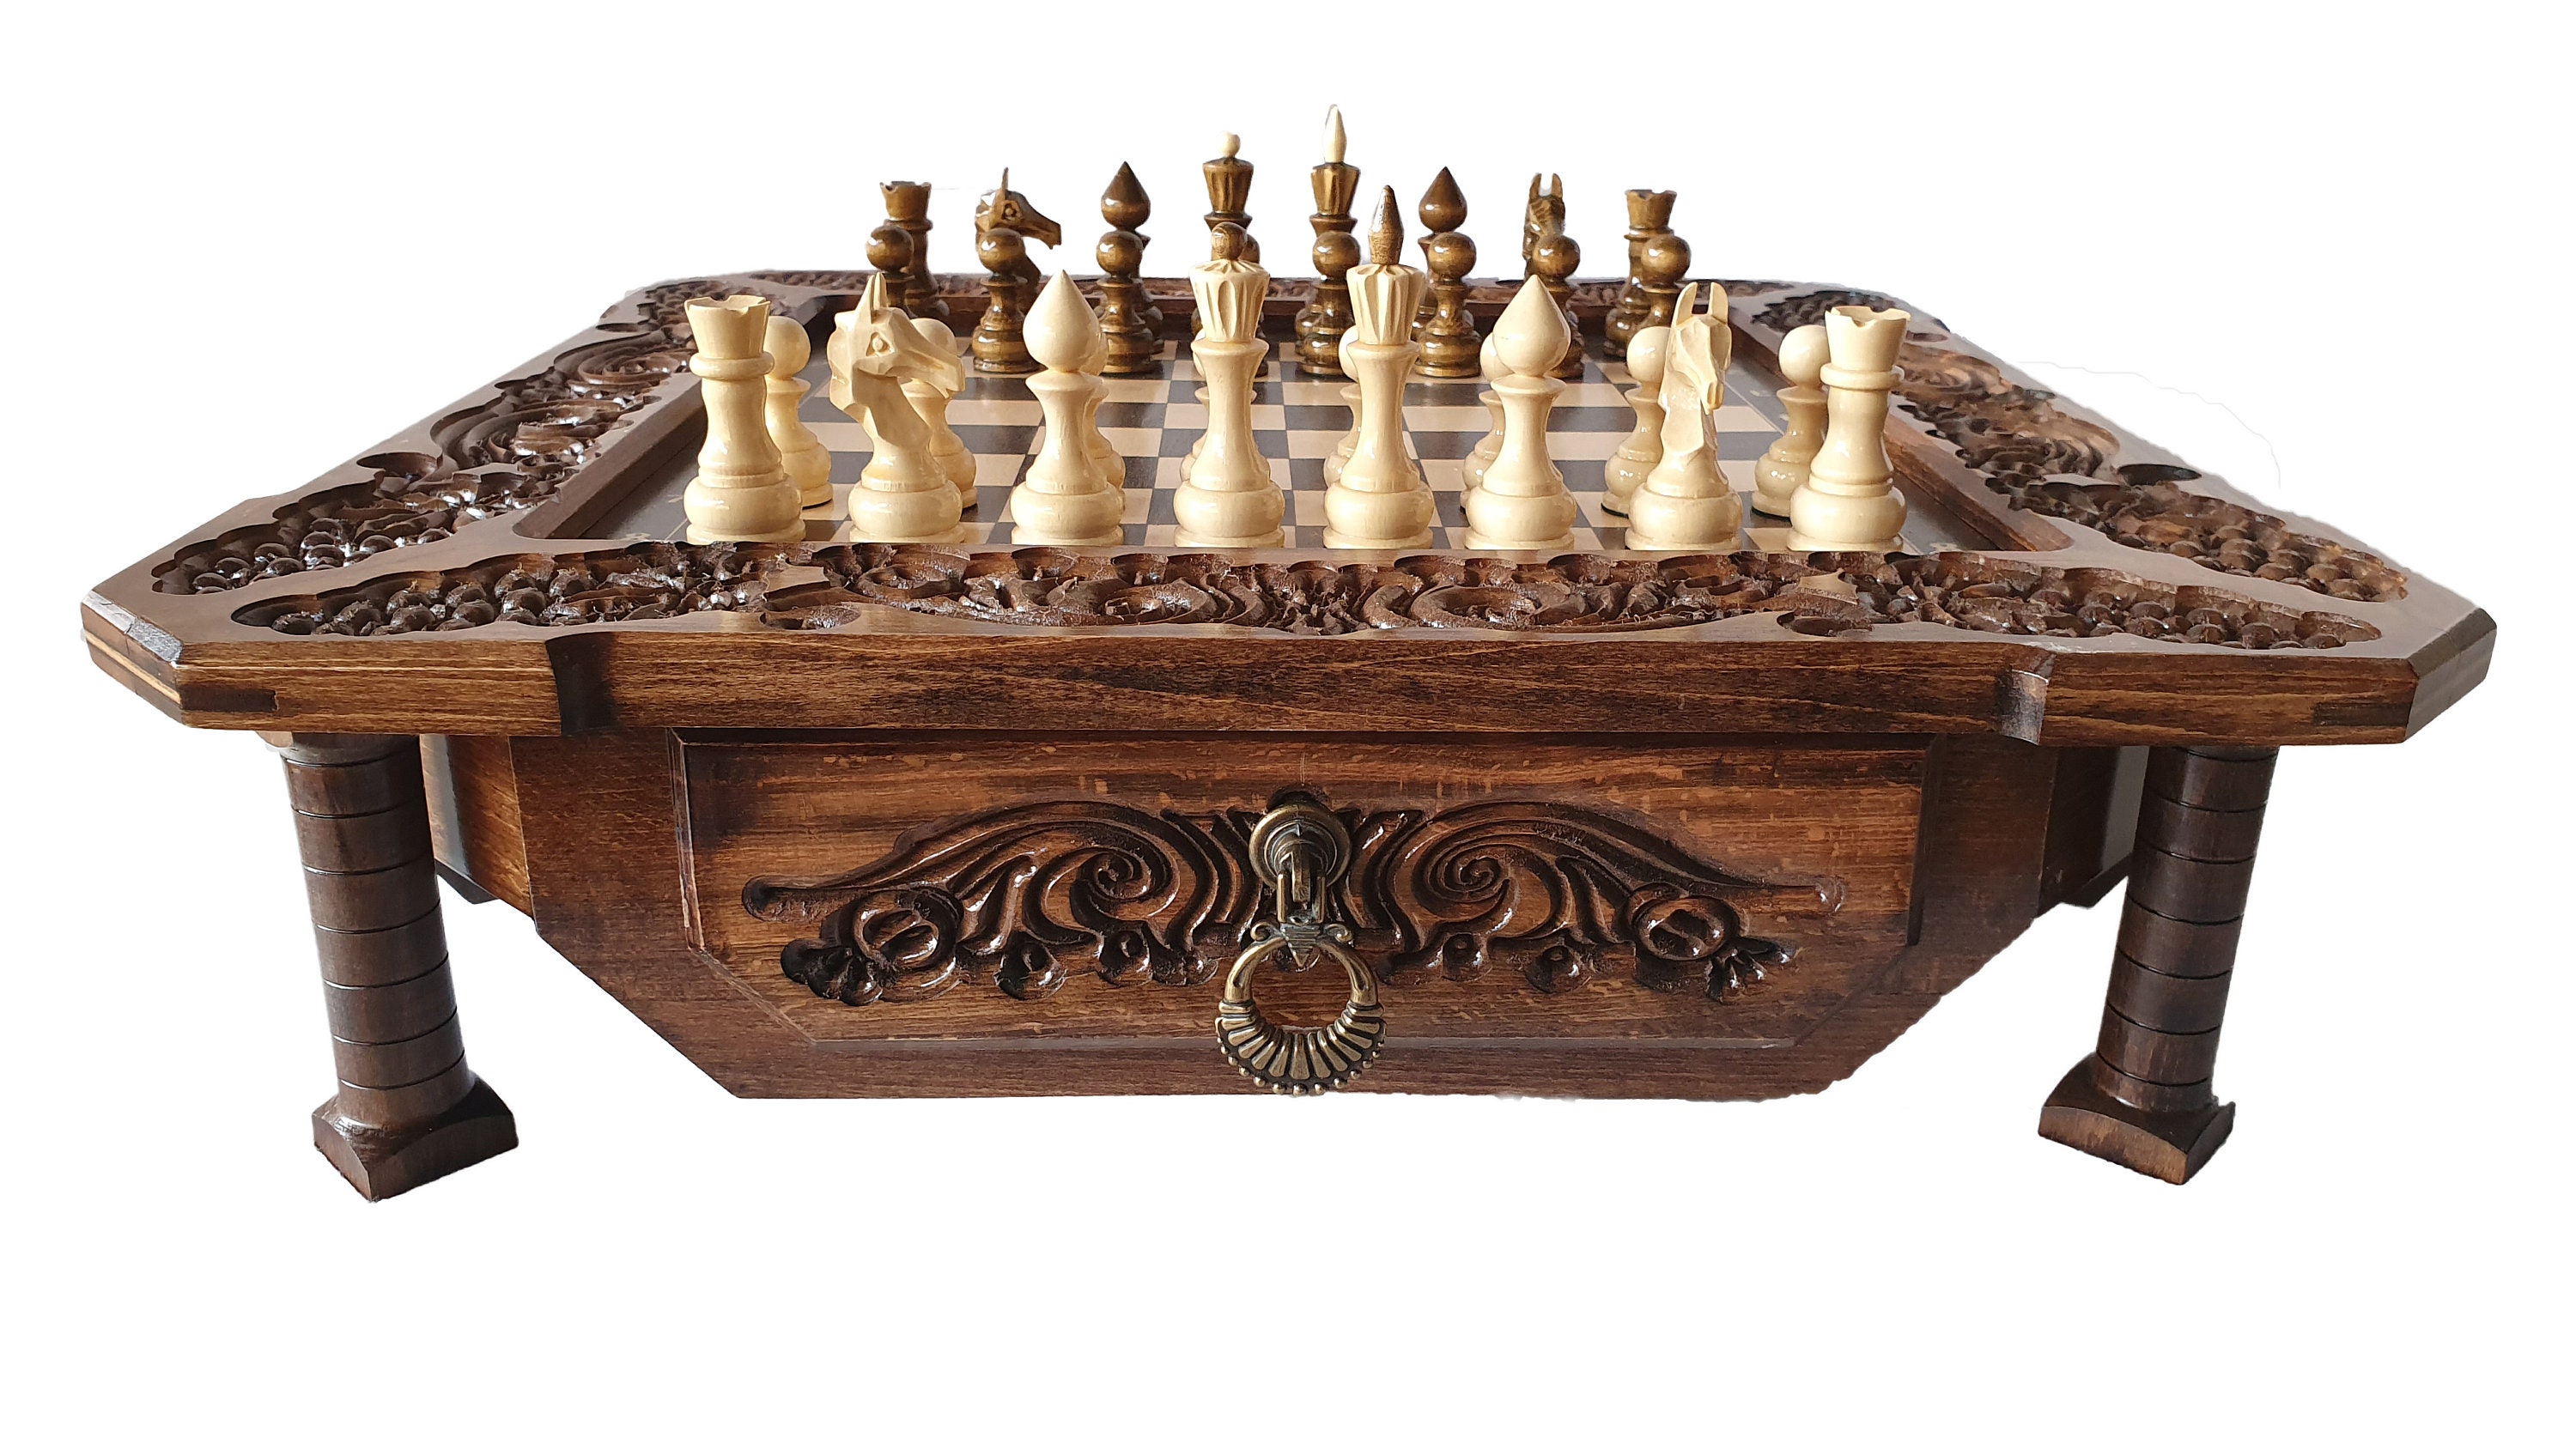 Armenian Handmade Chess and Backgammon Set "CROWN" Carving Gift board game 